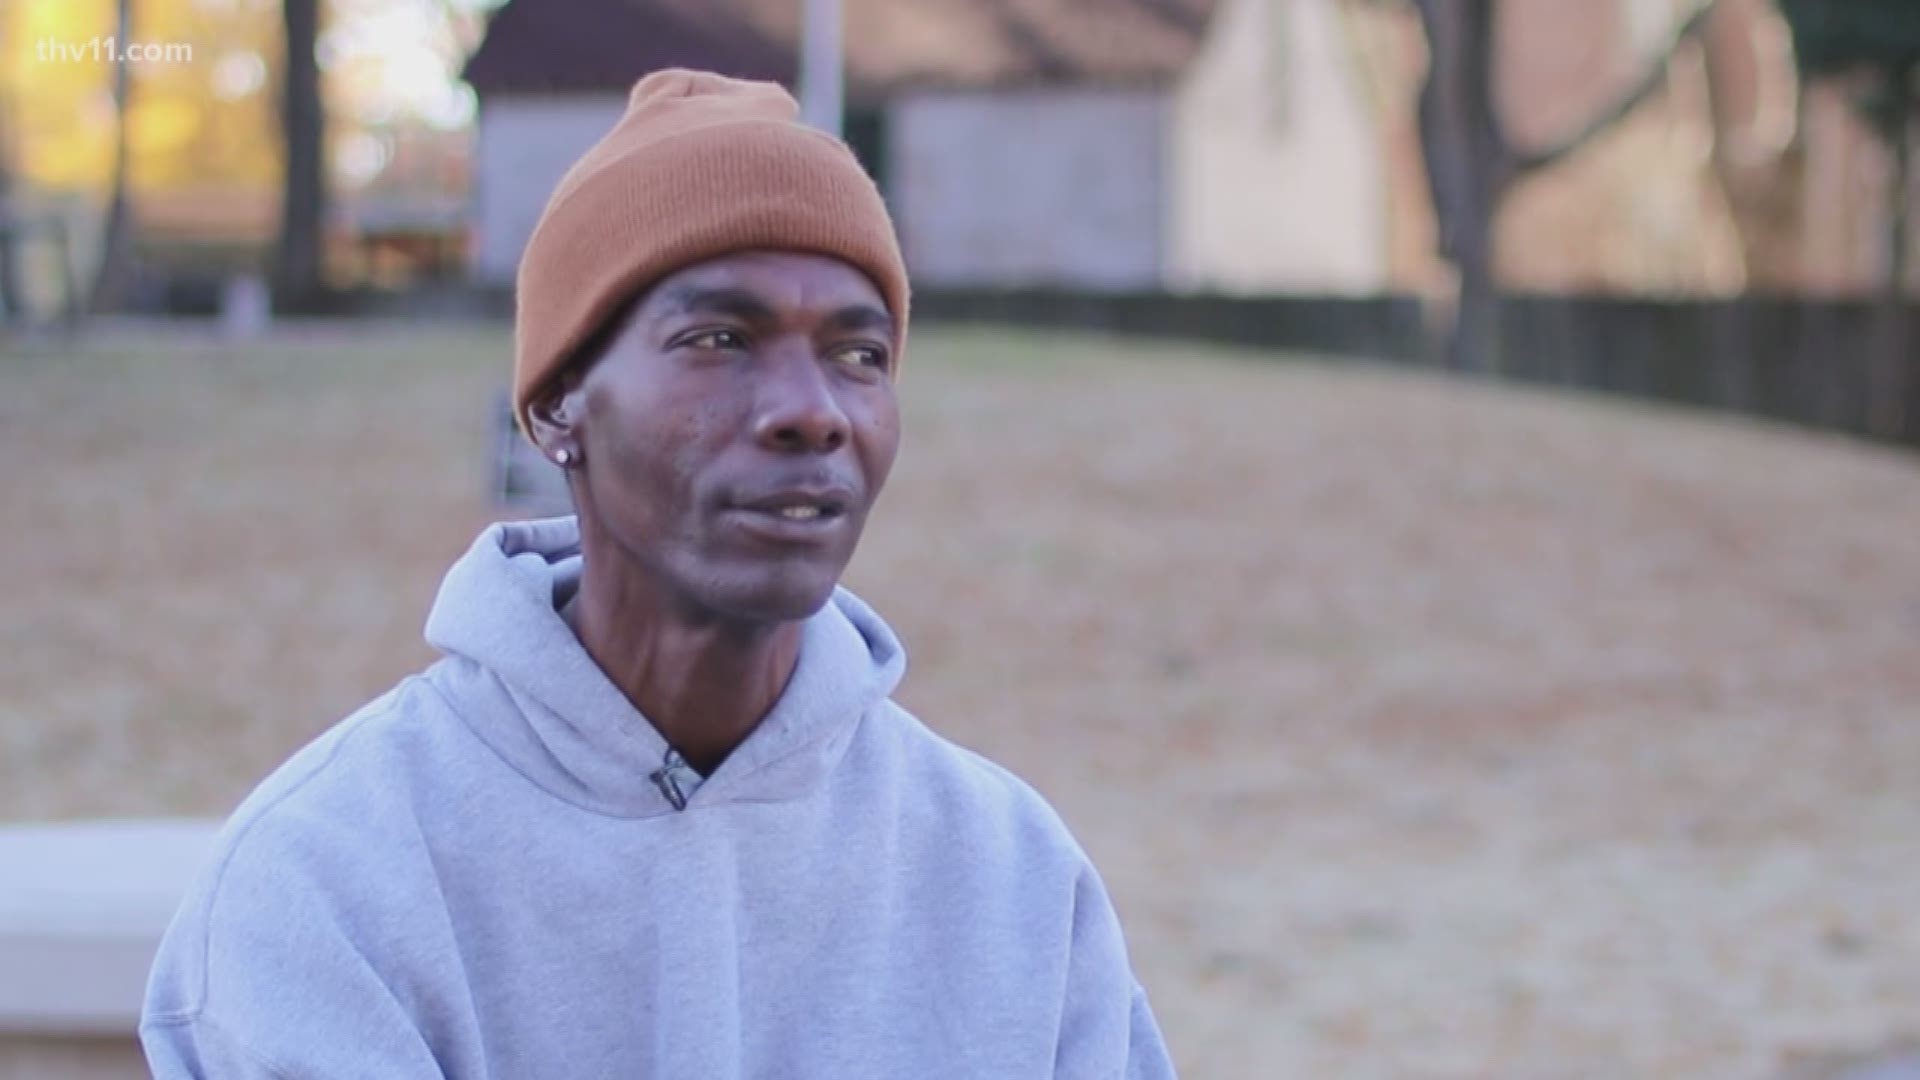 Roy paid his first month's rent for his own home with money earned/saved from the Little Rock program paying homeless people $9.25 per hour to pick up trash.